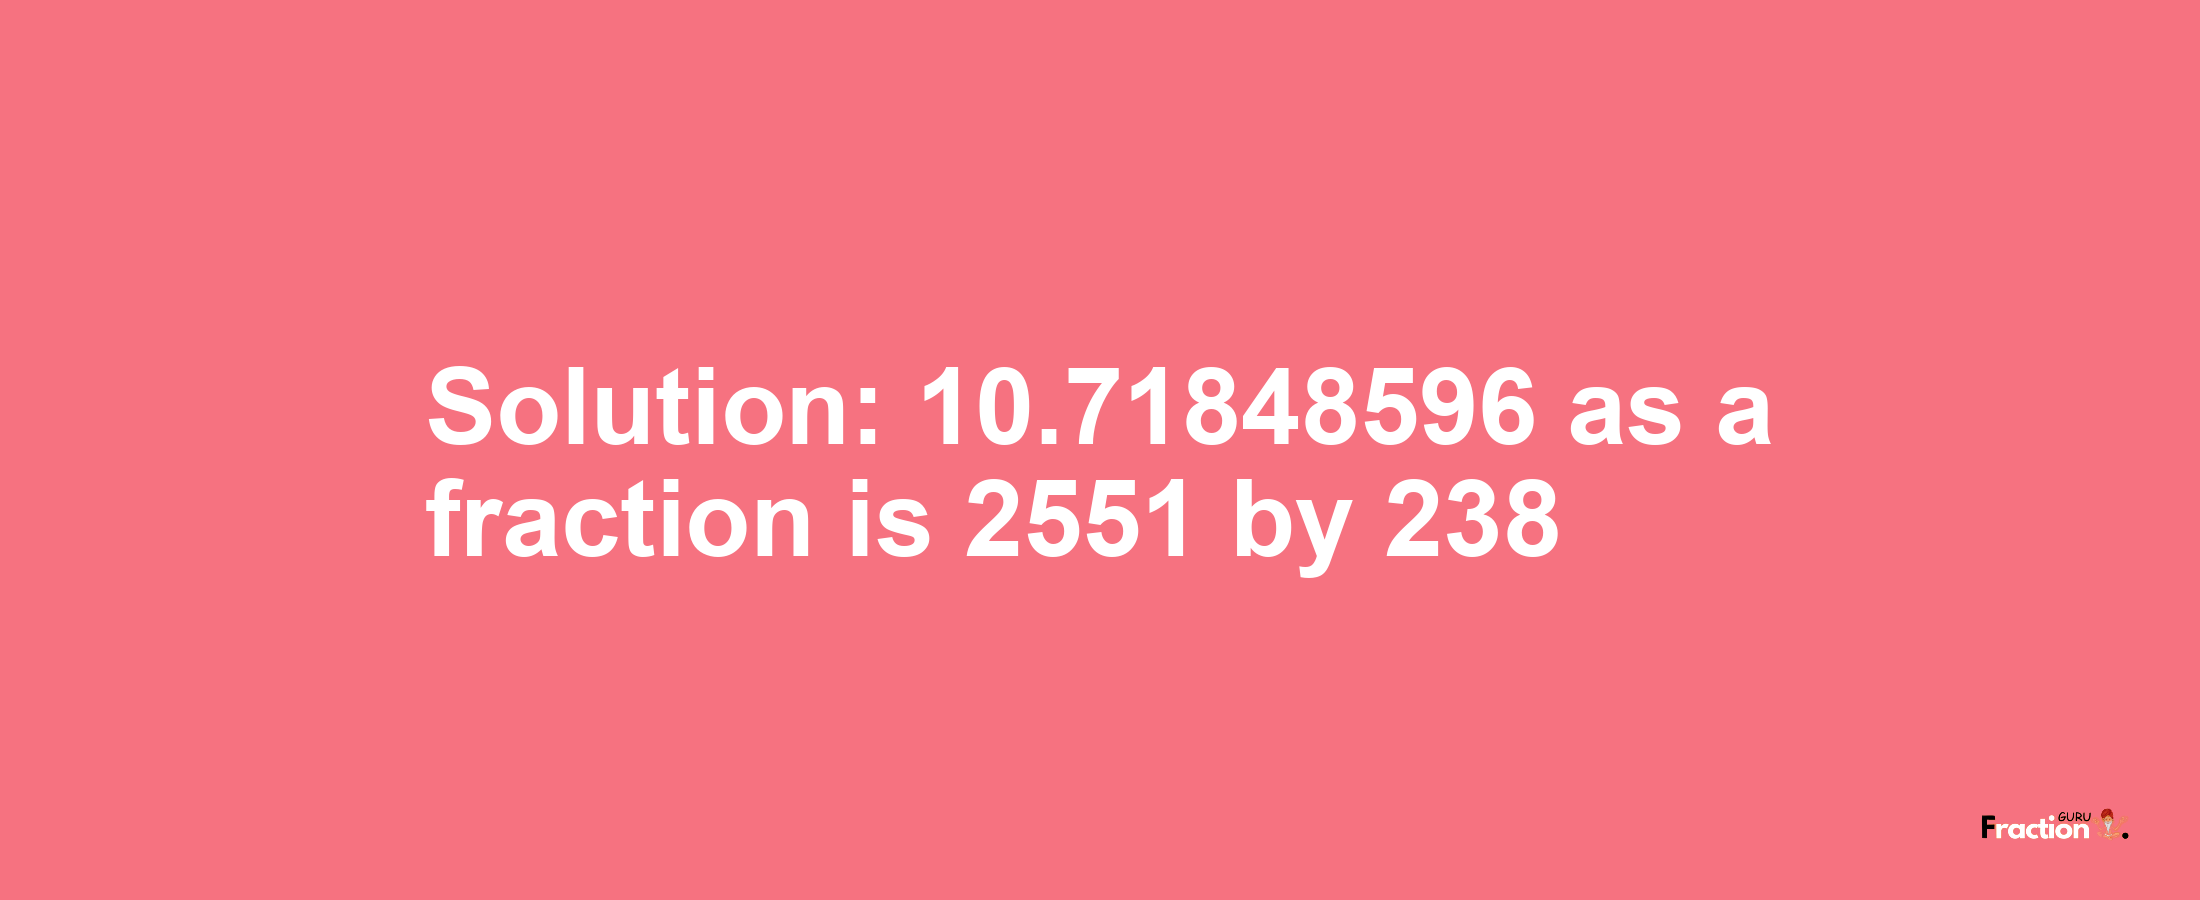 Solution:10.71848596 as a fraction is 2551/238